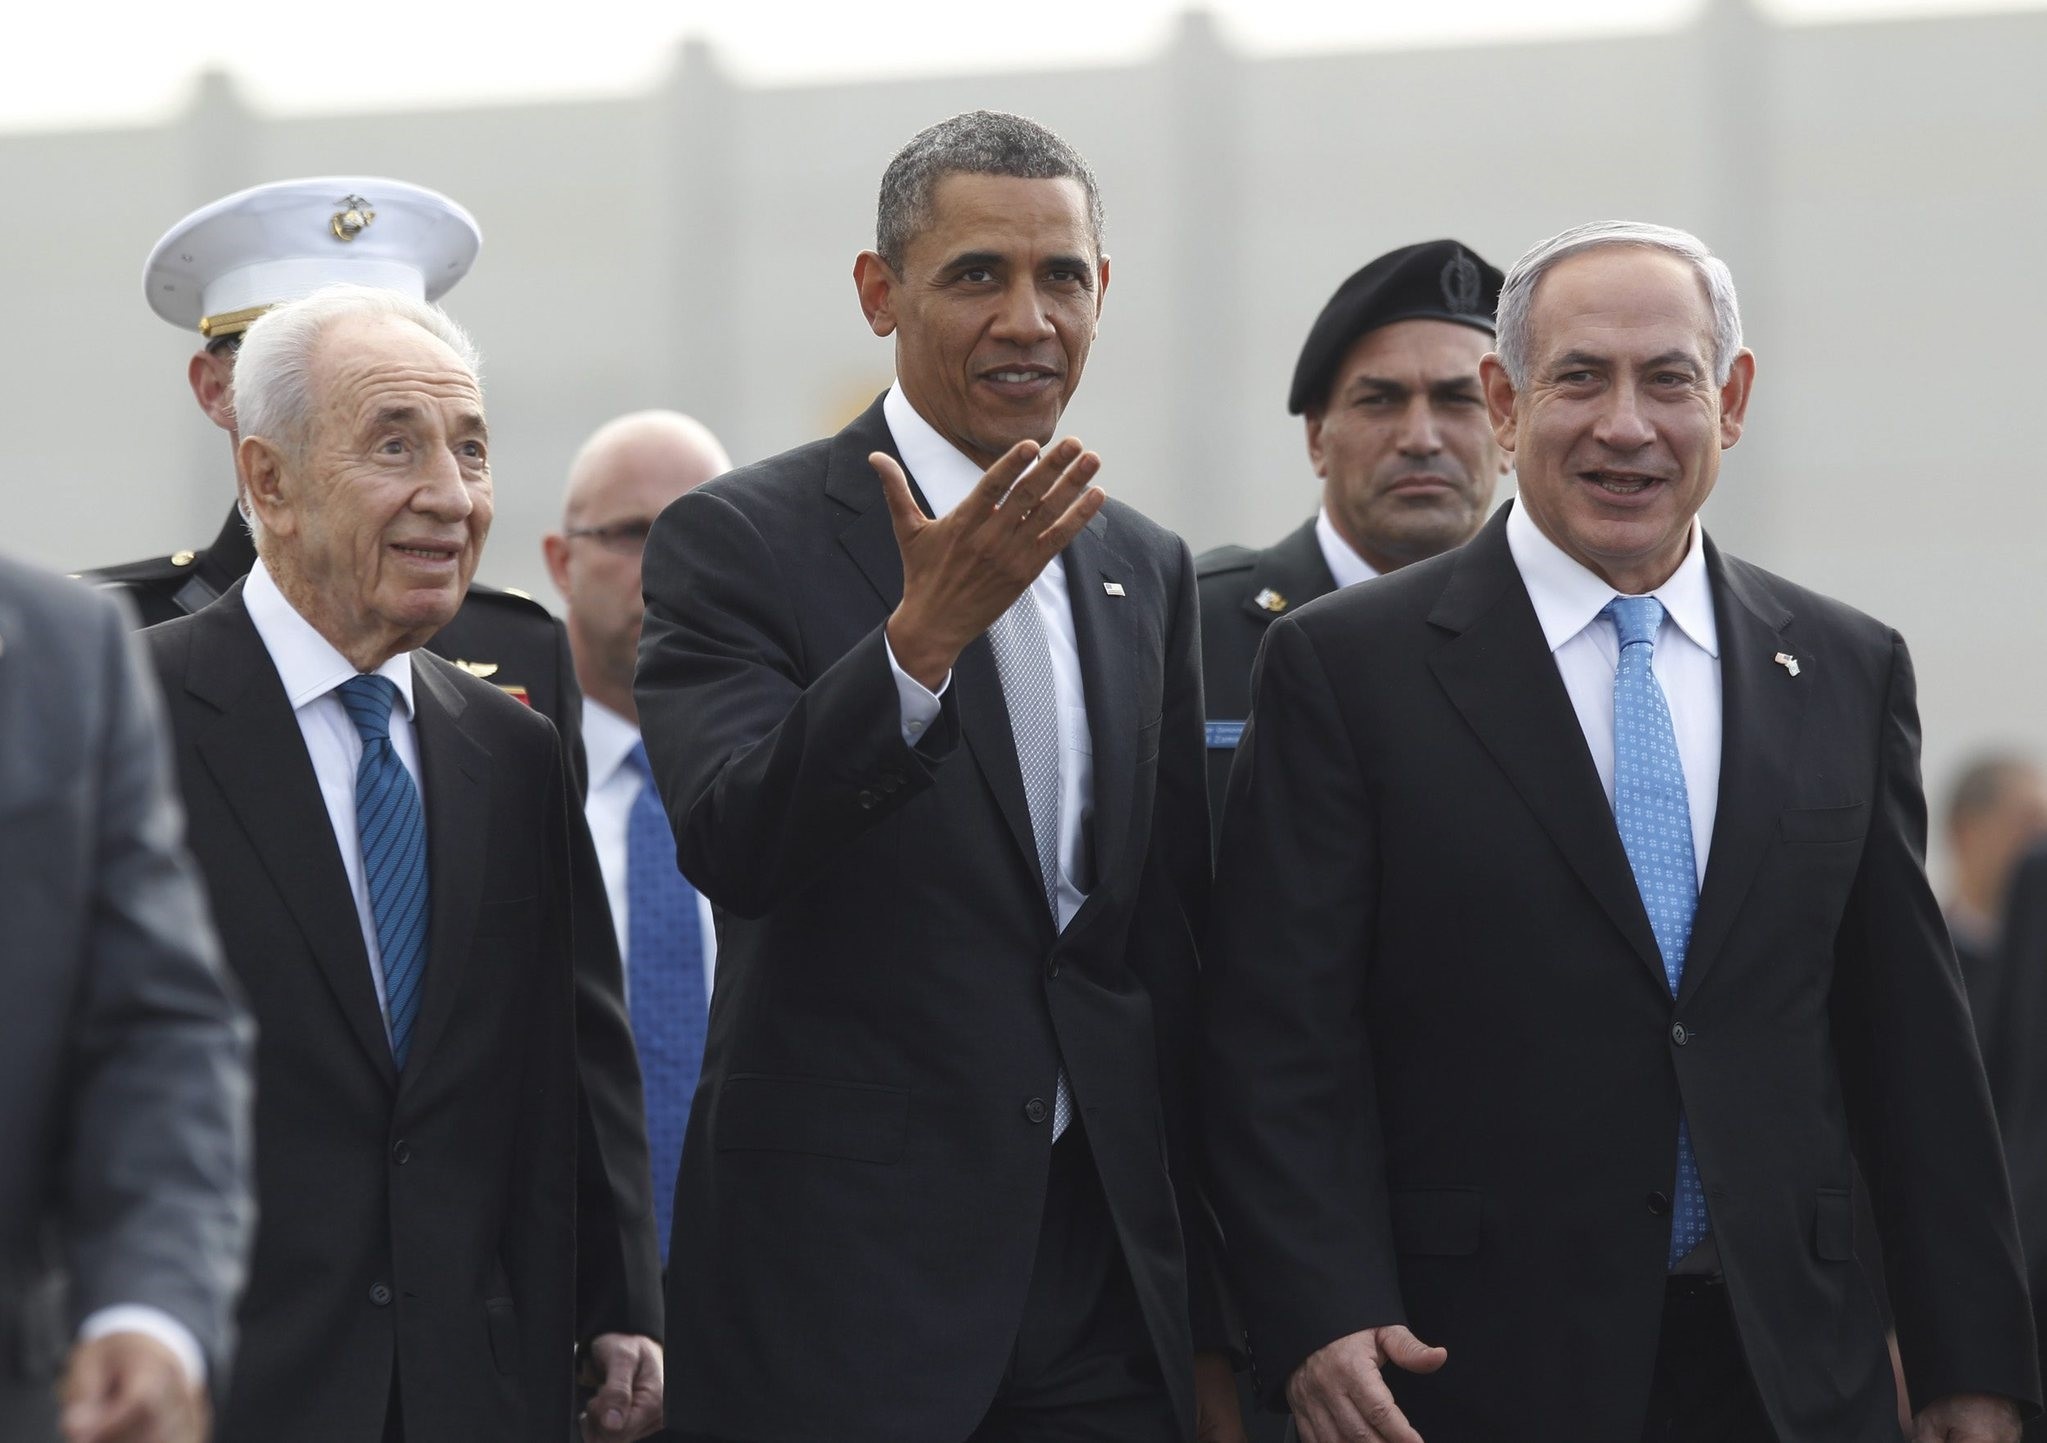 Obama (C) participates in a farewell ceremony with Israeli PM Netanyahu (R) and President Shimon Peres (L) in Tel Aviv, March 22, 2013. (Reuters Photo)